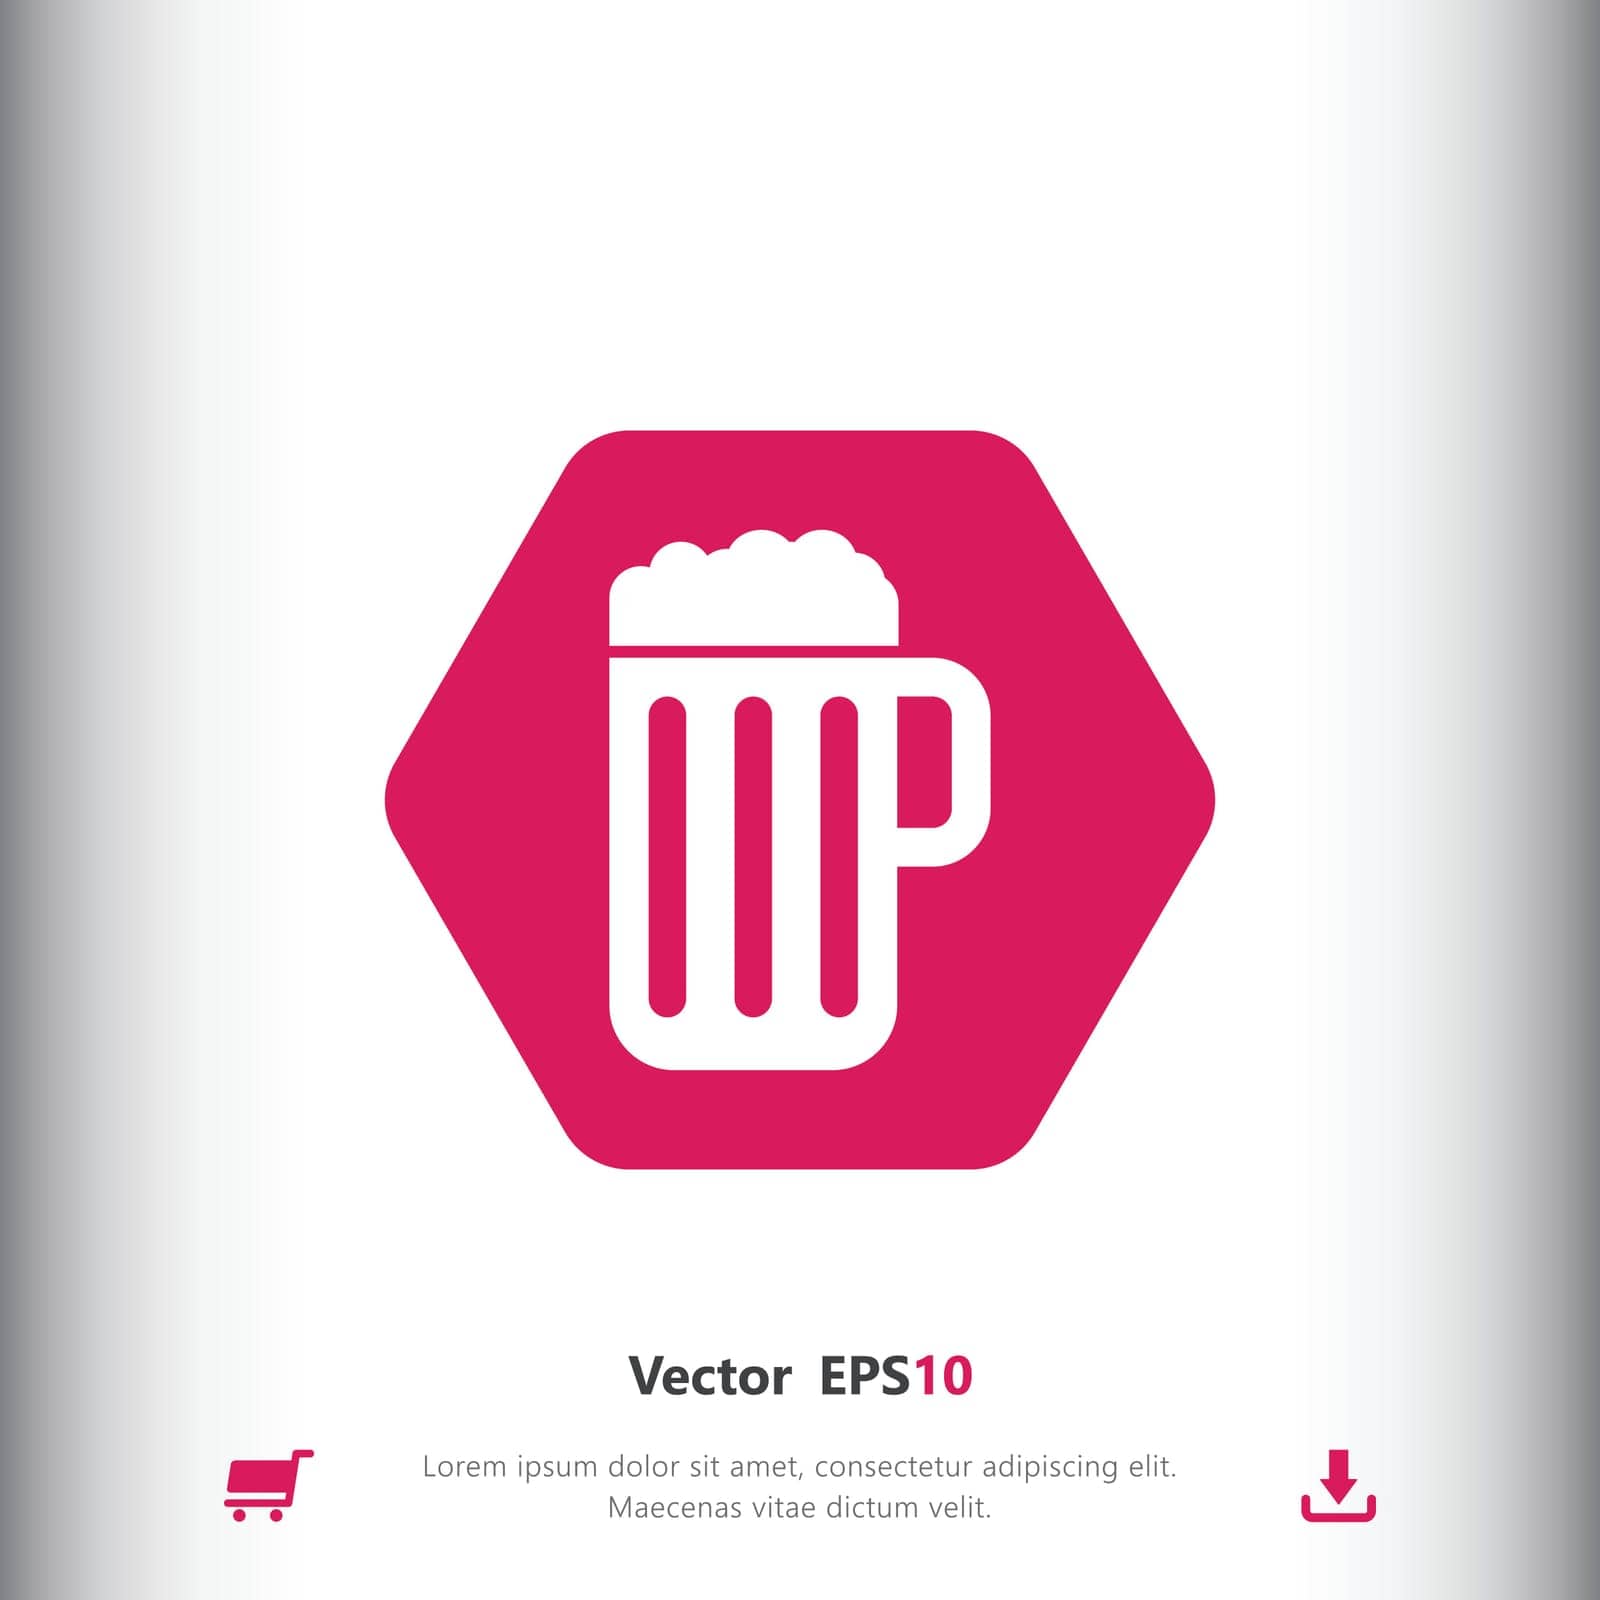 beer icon, sign icon, vector illustration. beer symbol. flat icon. flat design style for web and mobile.